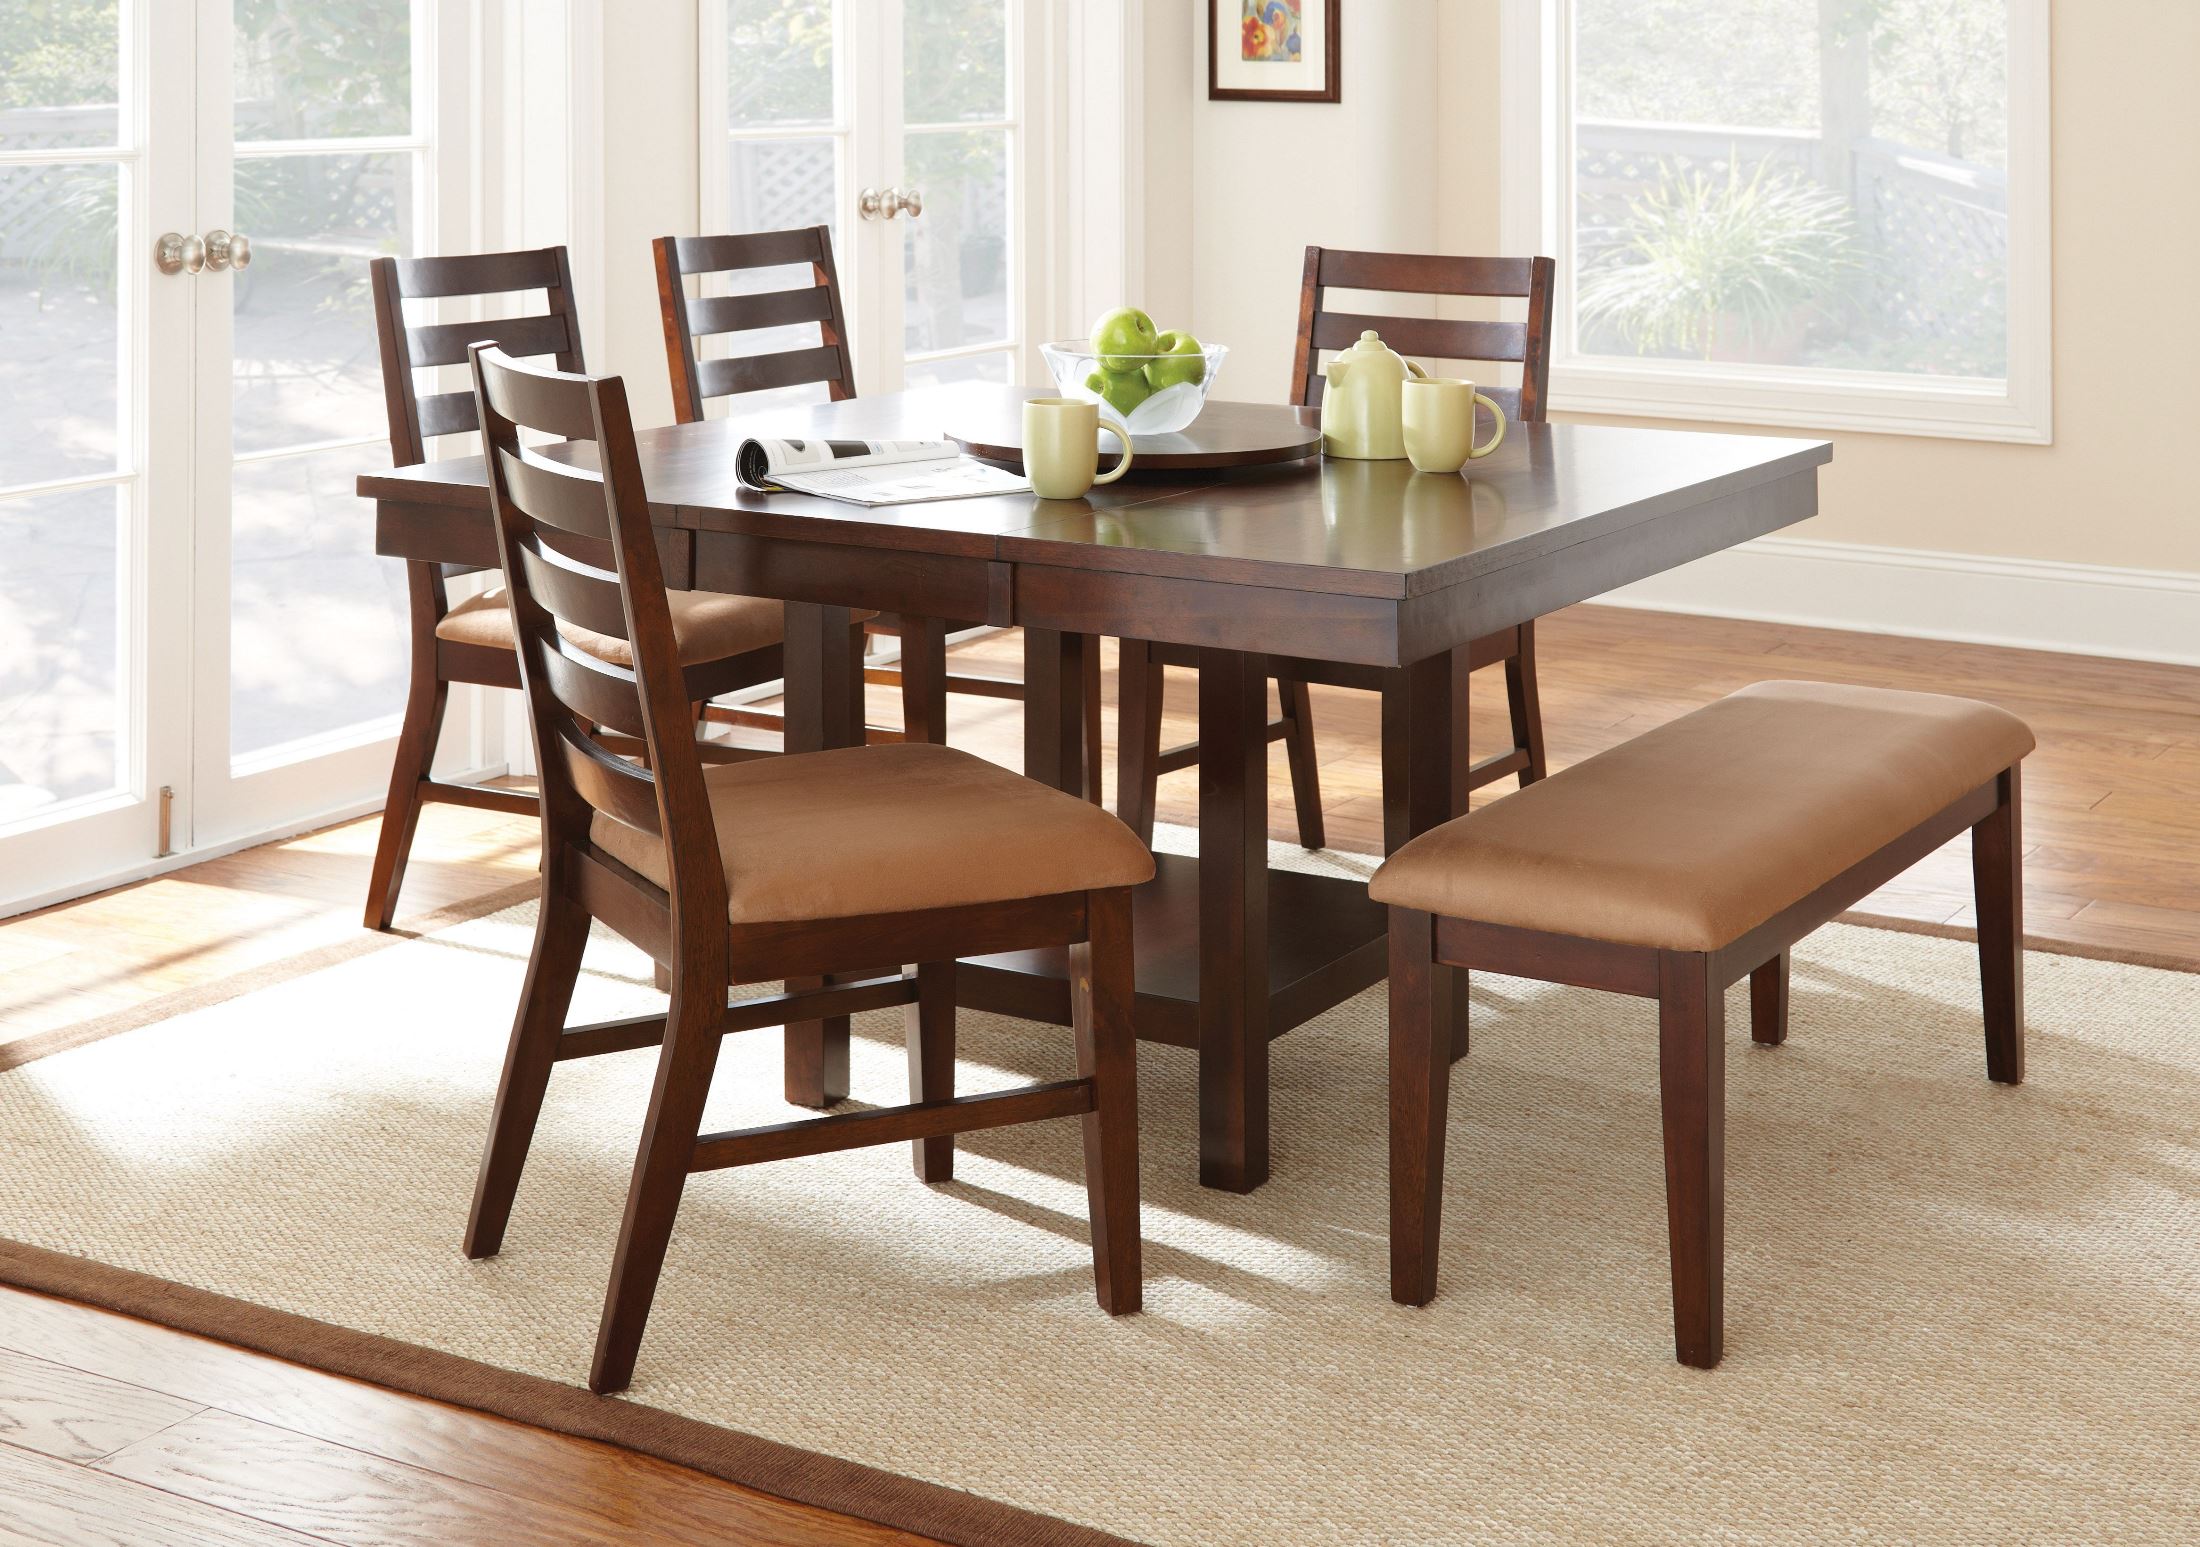 Square Extendable Dining Room Table Modern Rustic